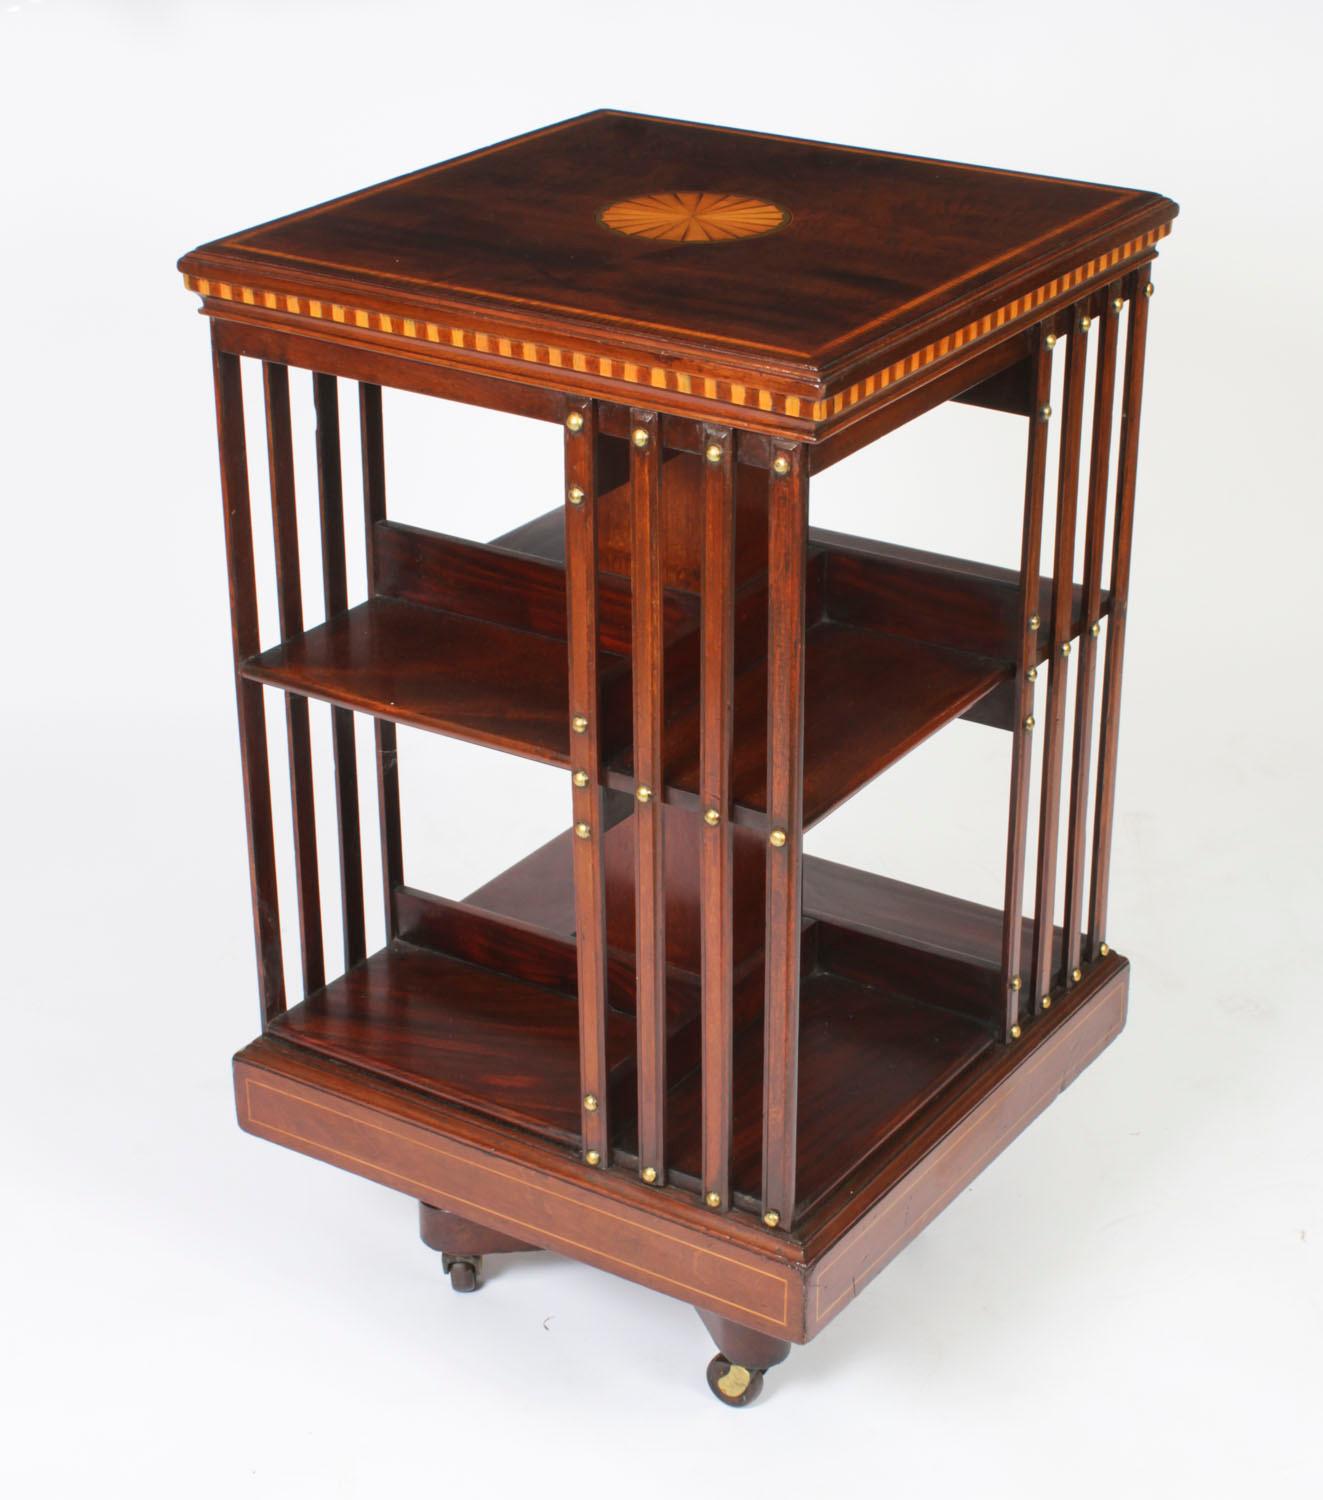 Antique Edwardian Revolving Bookcase Flame Mahogany c.1900 For Sale 6